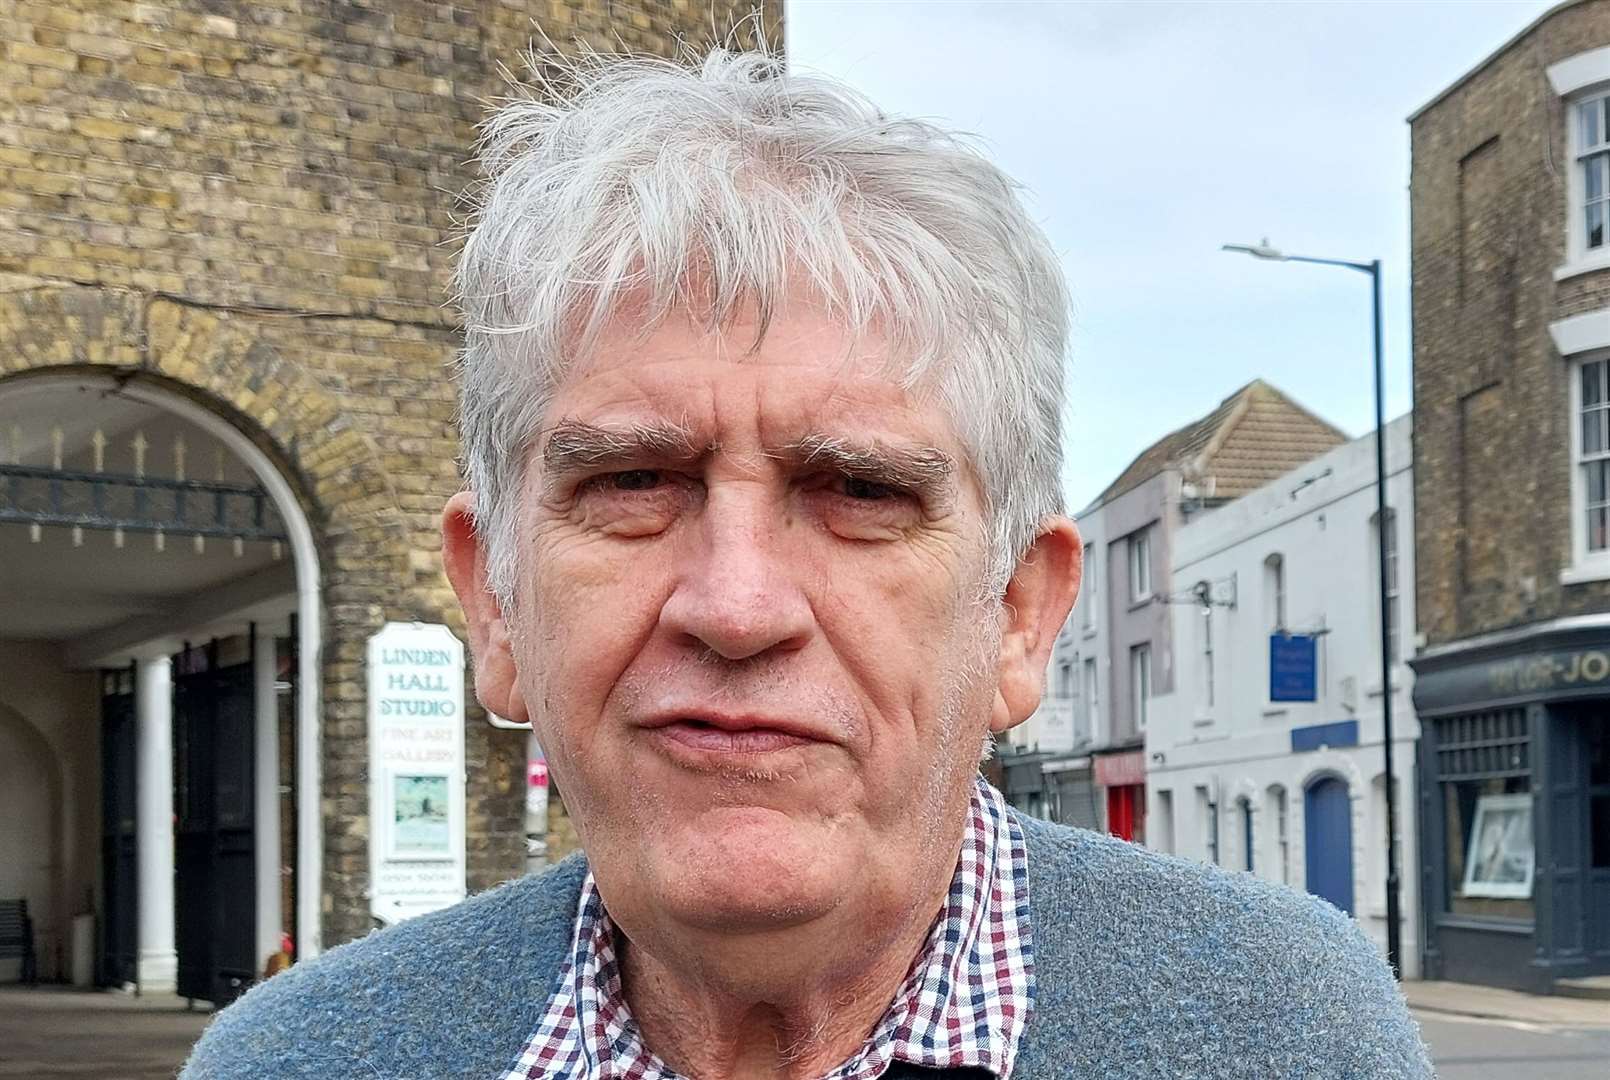 Dr Alan Spence, who has lived in Deal for 10 years, feels pedestrianising the High Street is a good idea